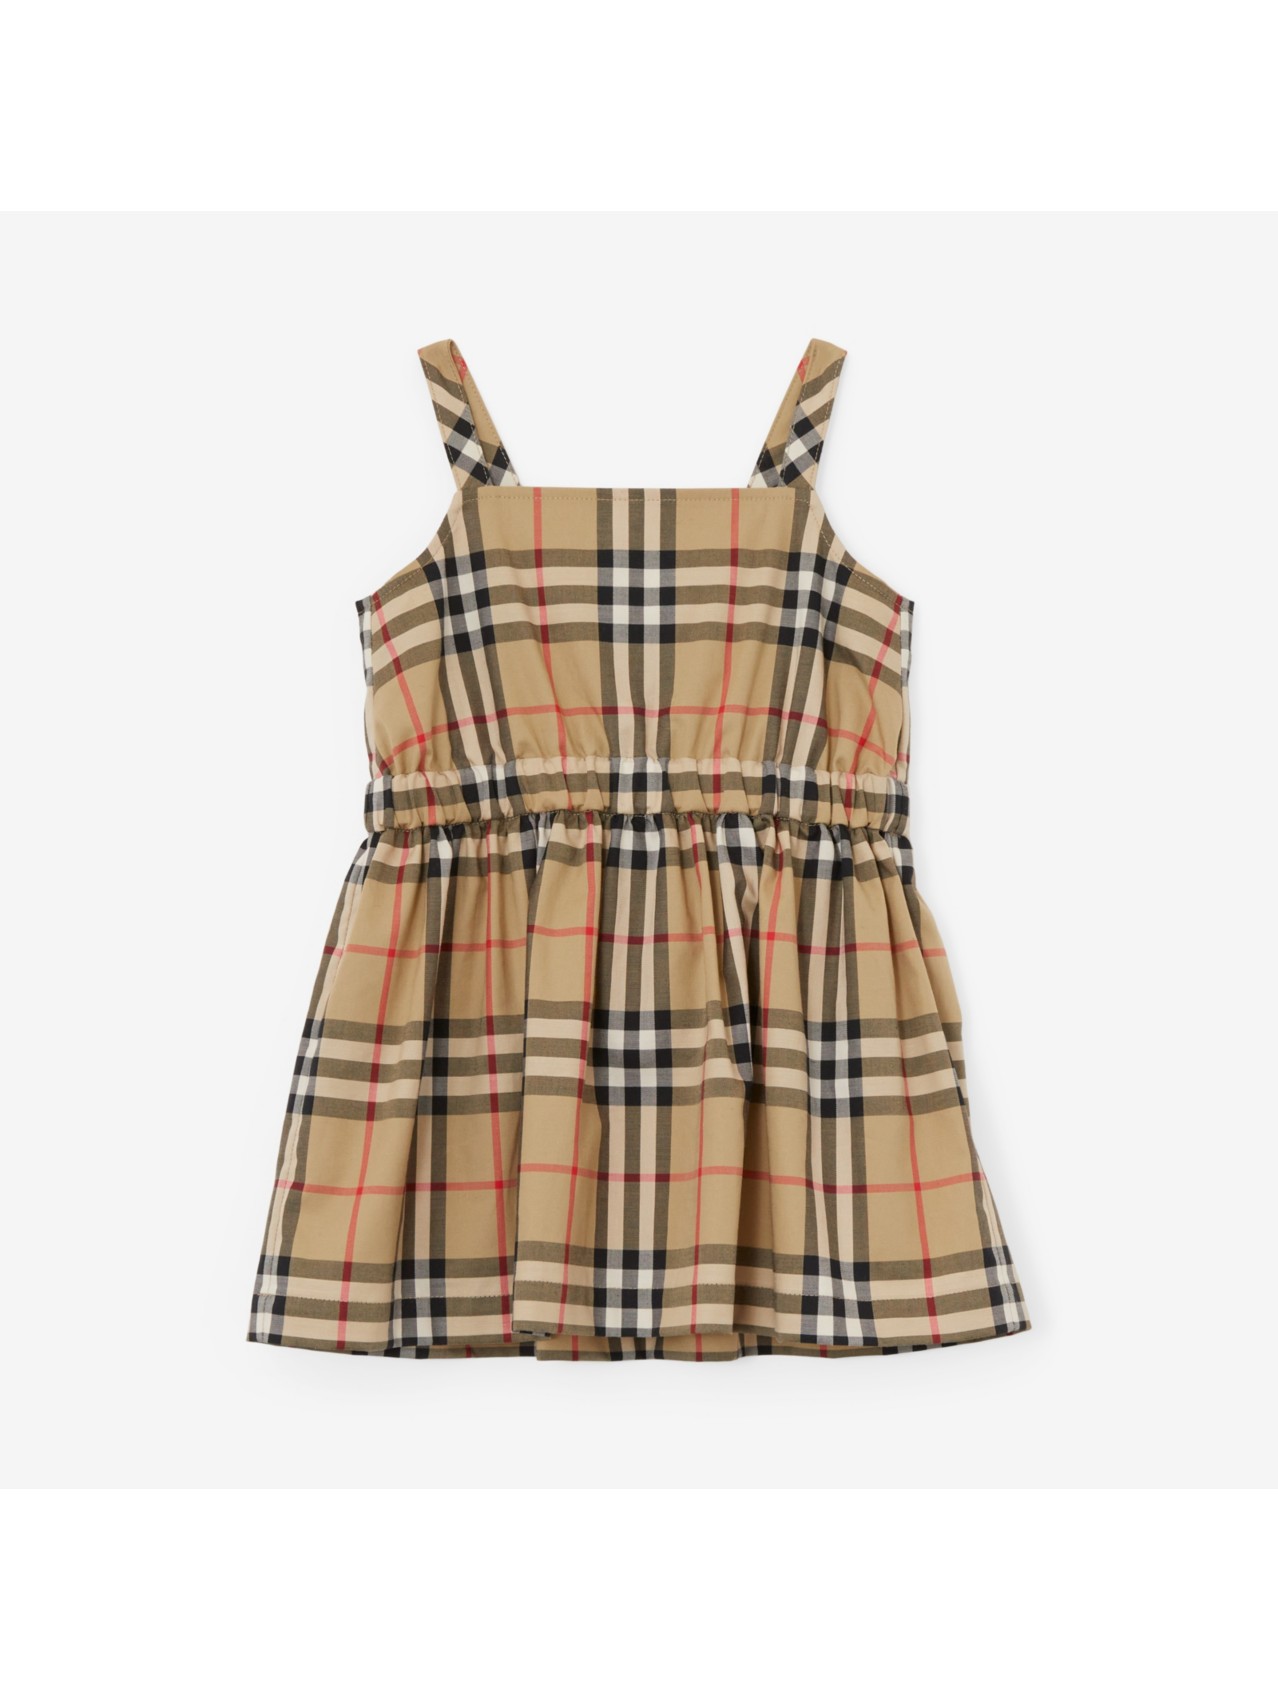 Baby Designer Clothing | Burberry Baby | Burberry® Official